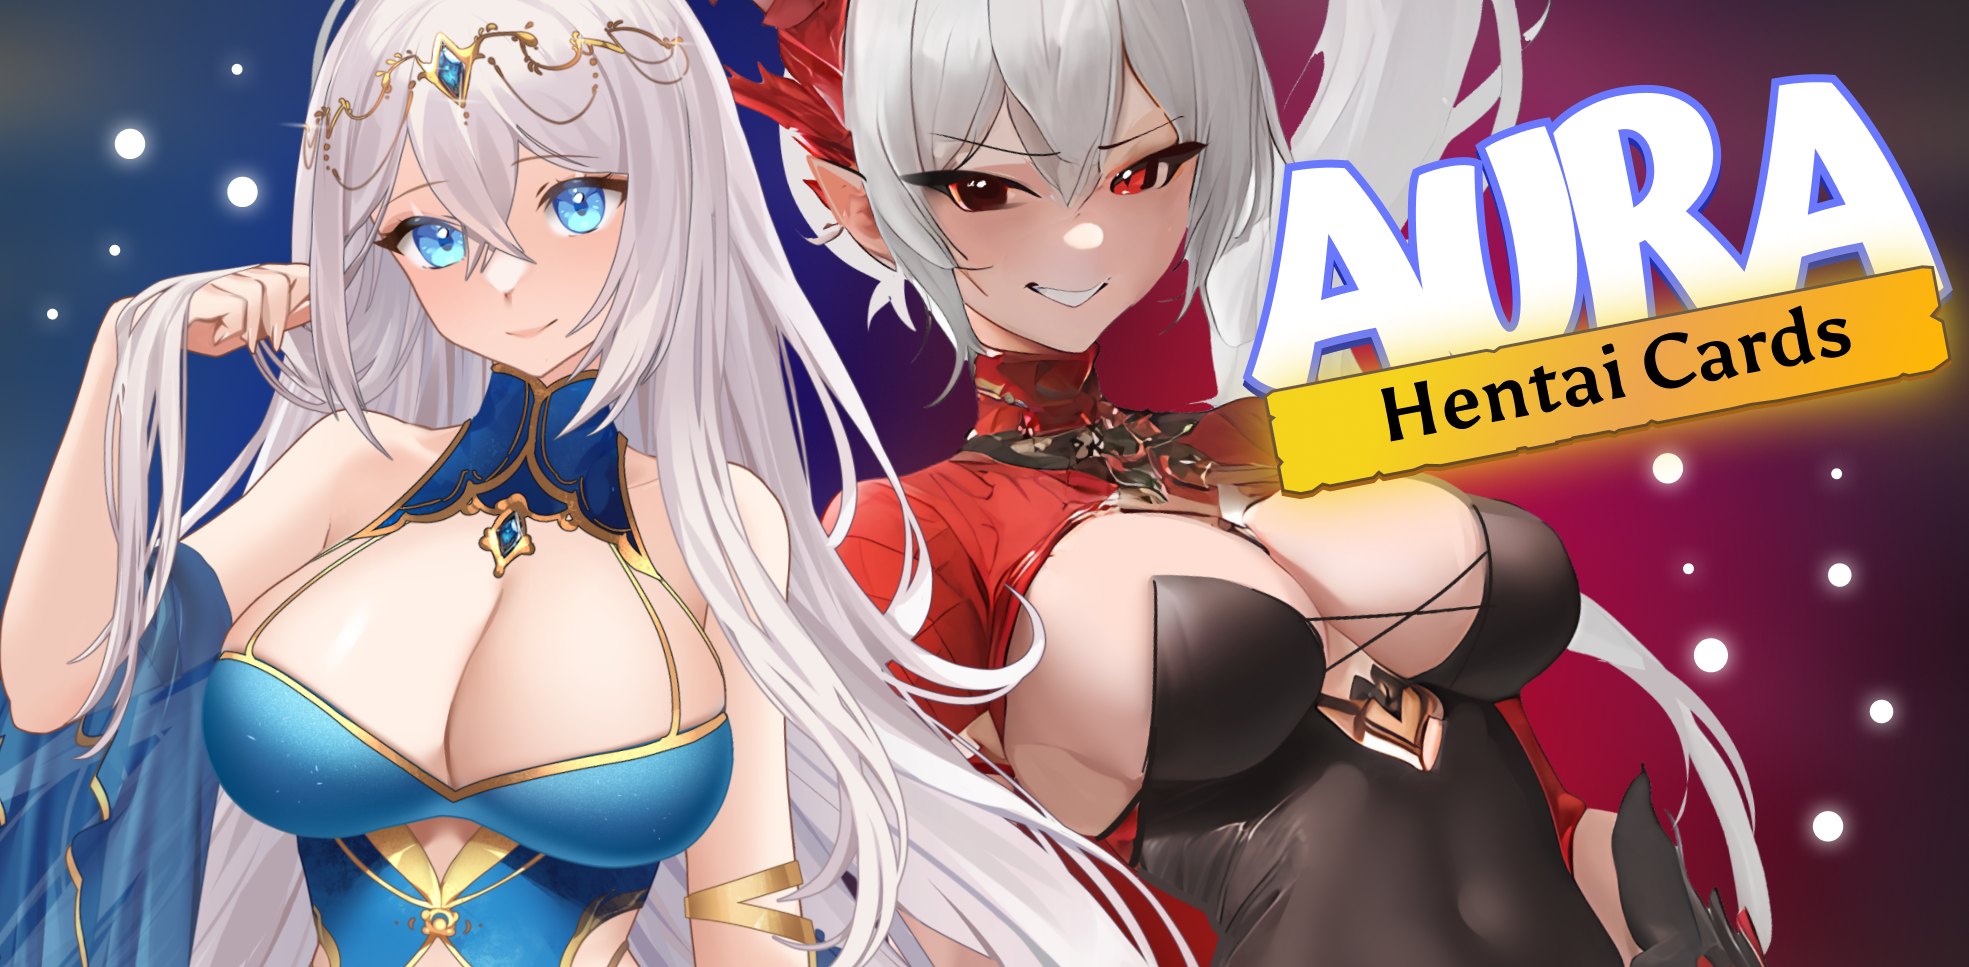 NEW GAME - AURA: Hentai Cards! - WANDERER: Broken Bed | NEW v0.9 - CHRISMAS  GIFT by TOPHOUSE